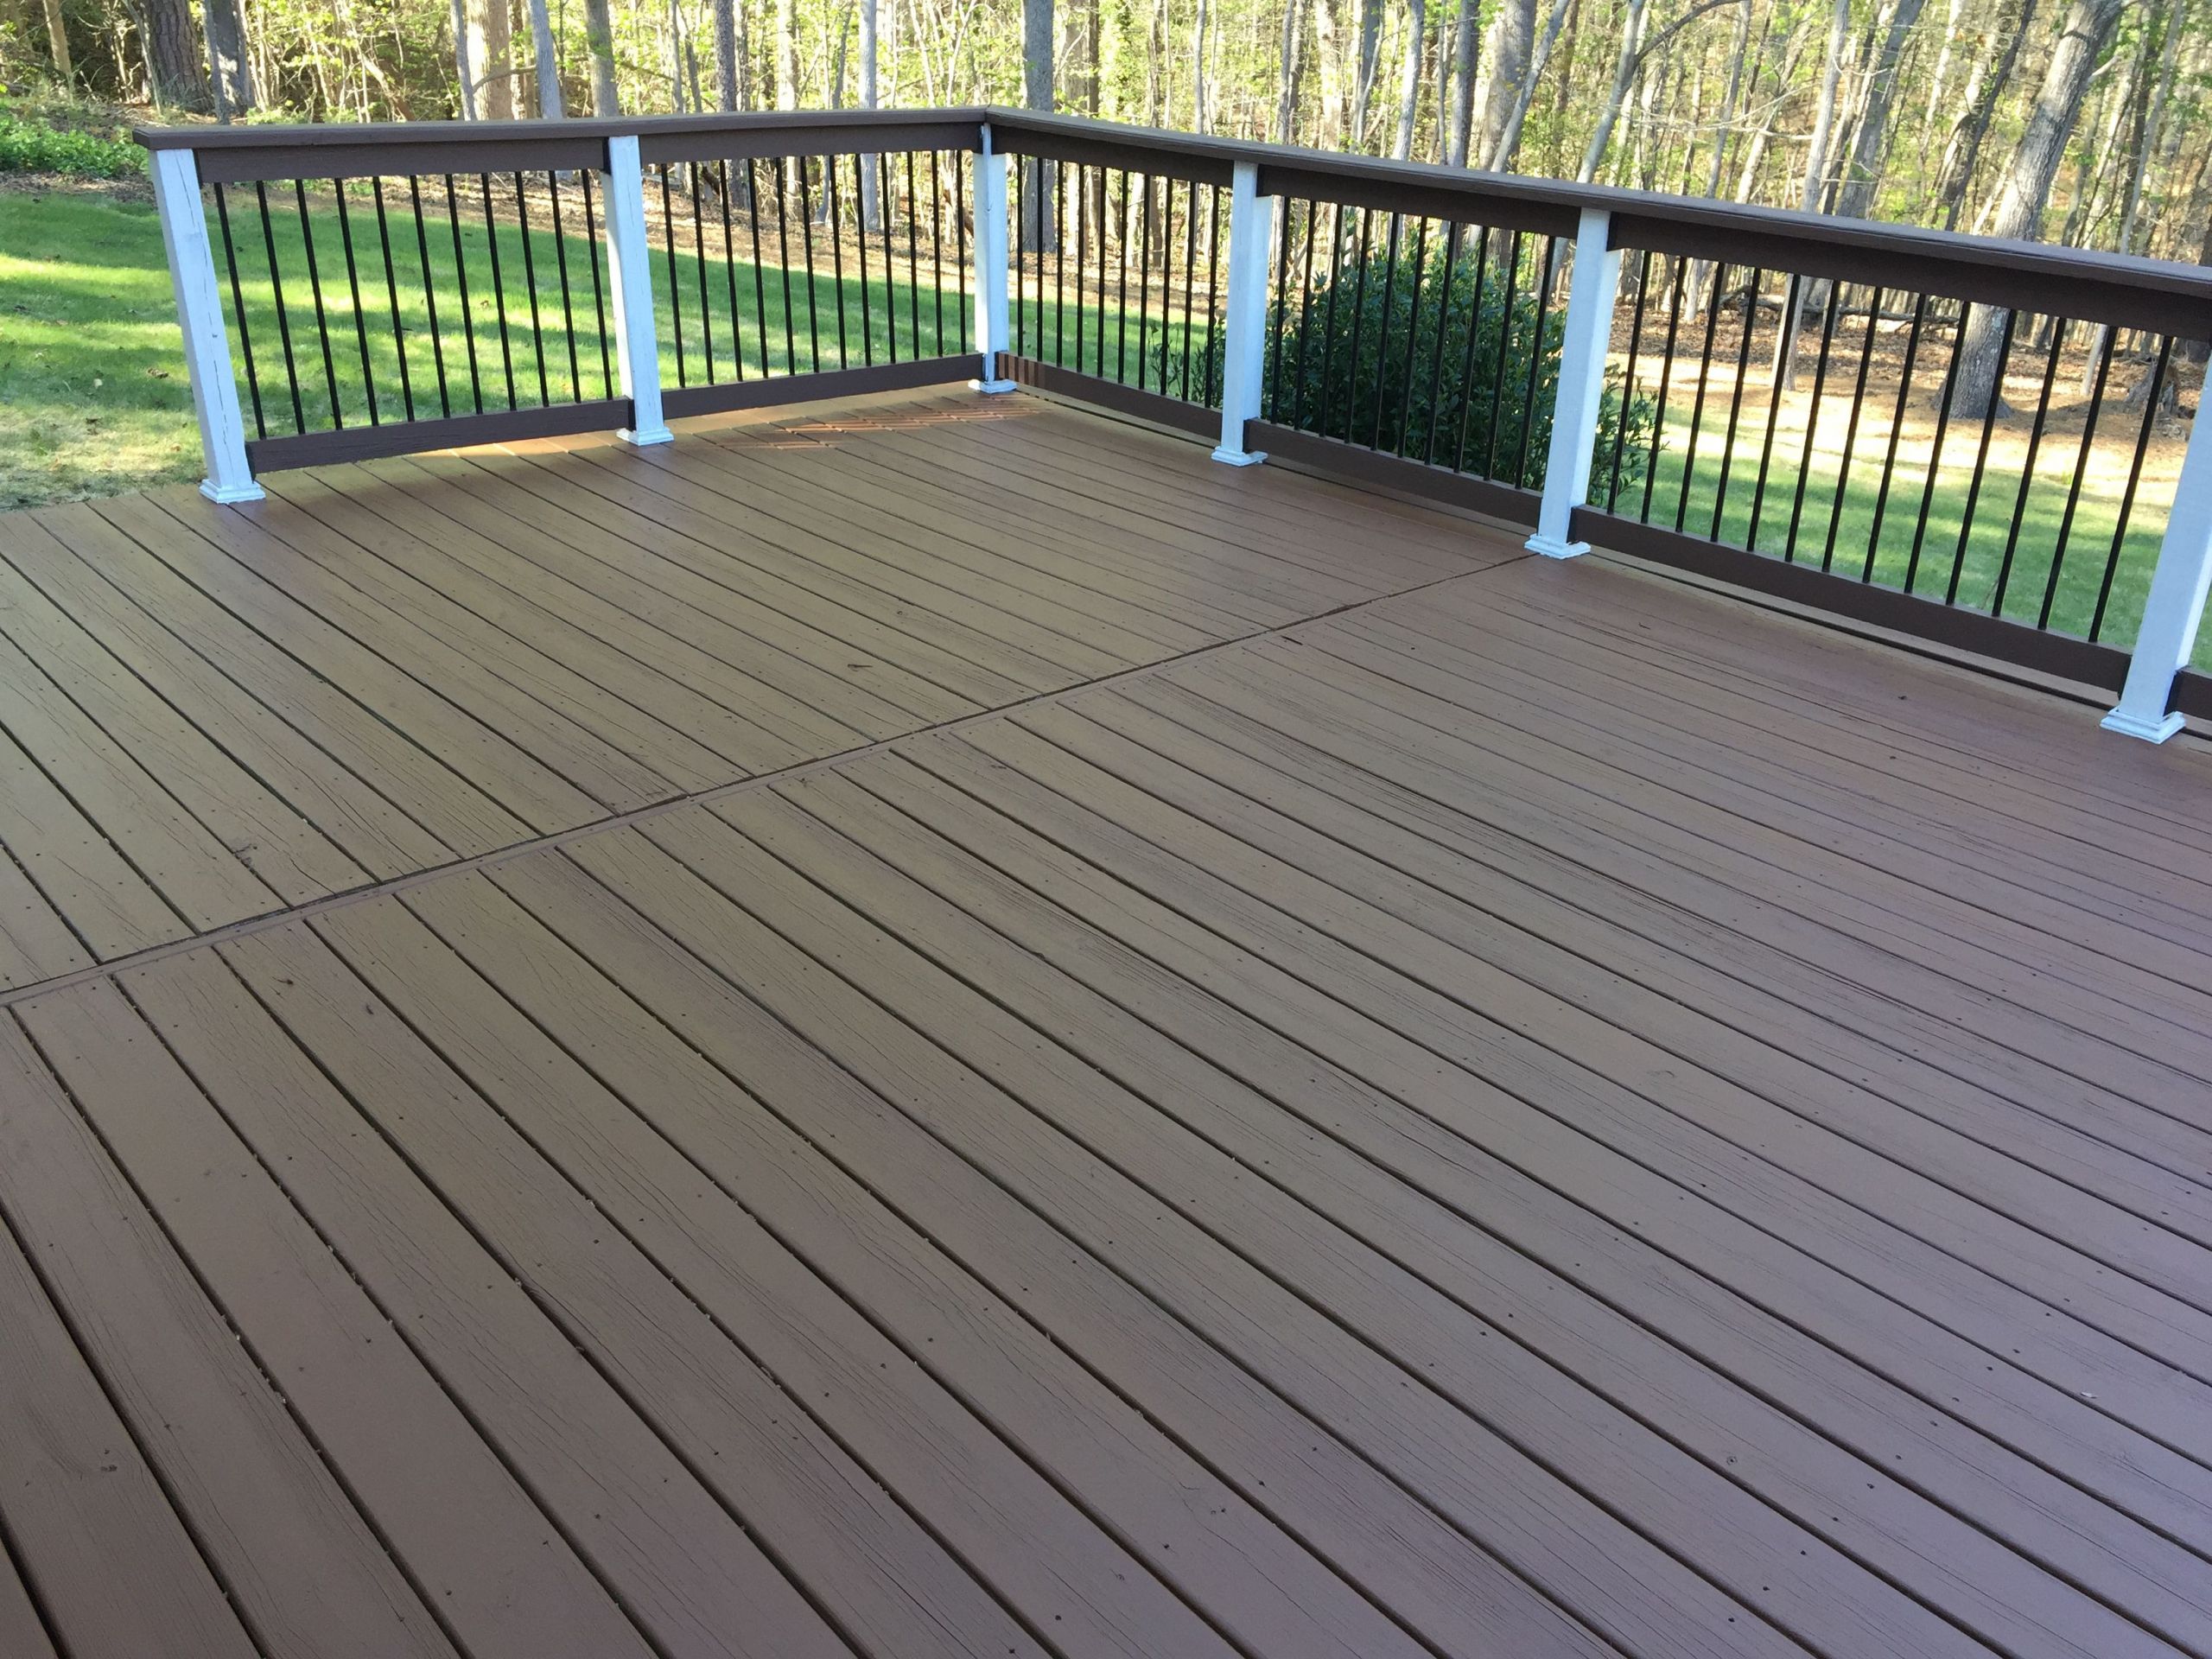 Painted Deck Colors
 Did the deck today and love the double shade deck paint